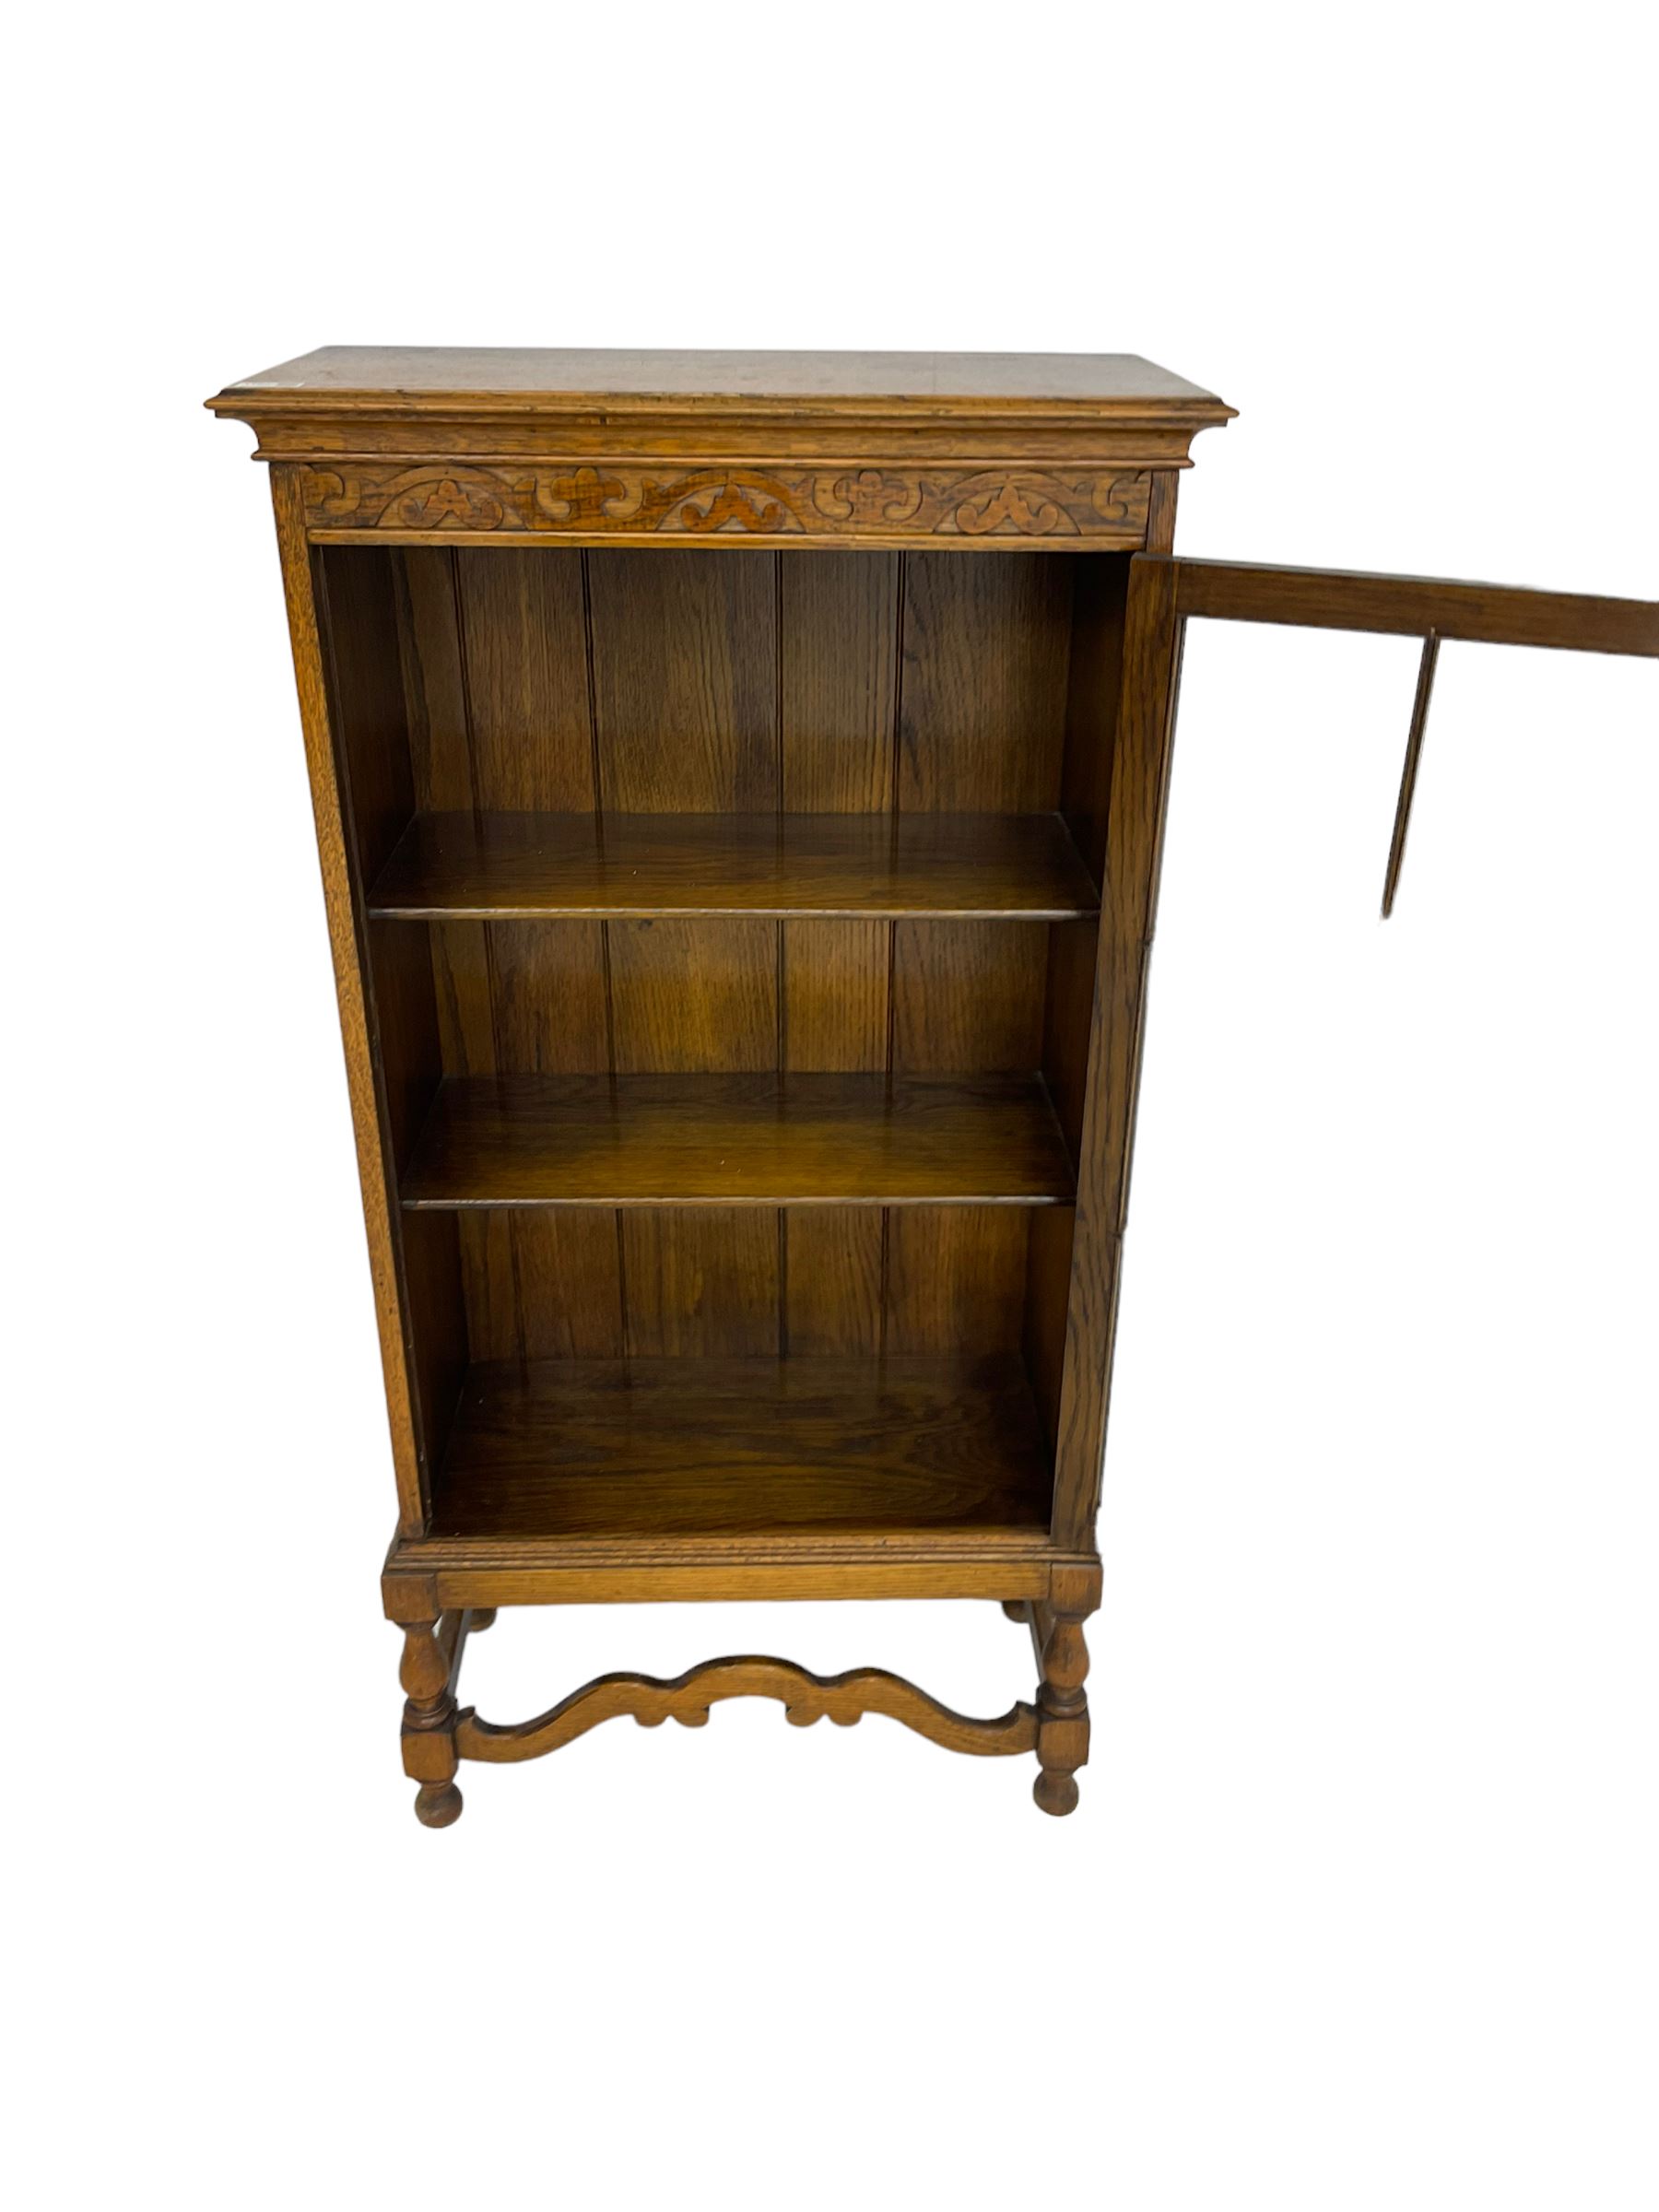 Early 20th century oak bookcase display cabinet - Image 5 of 6